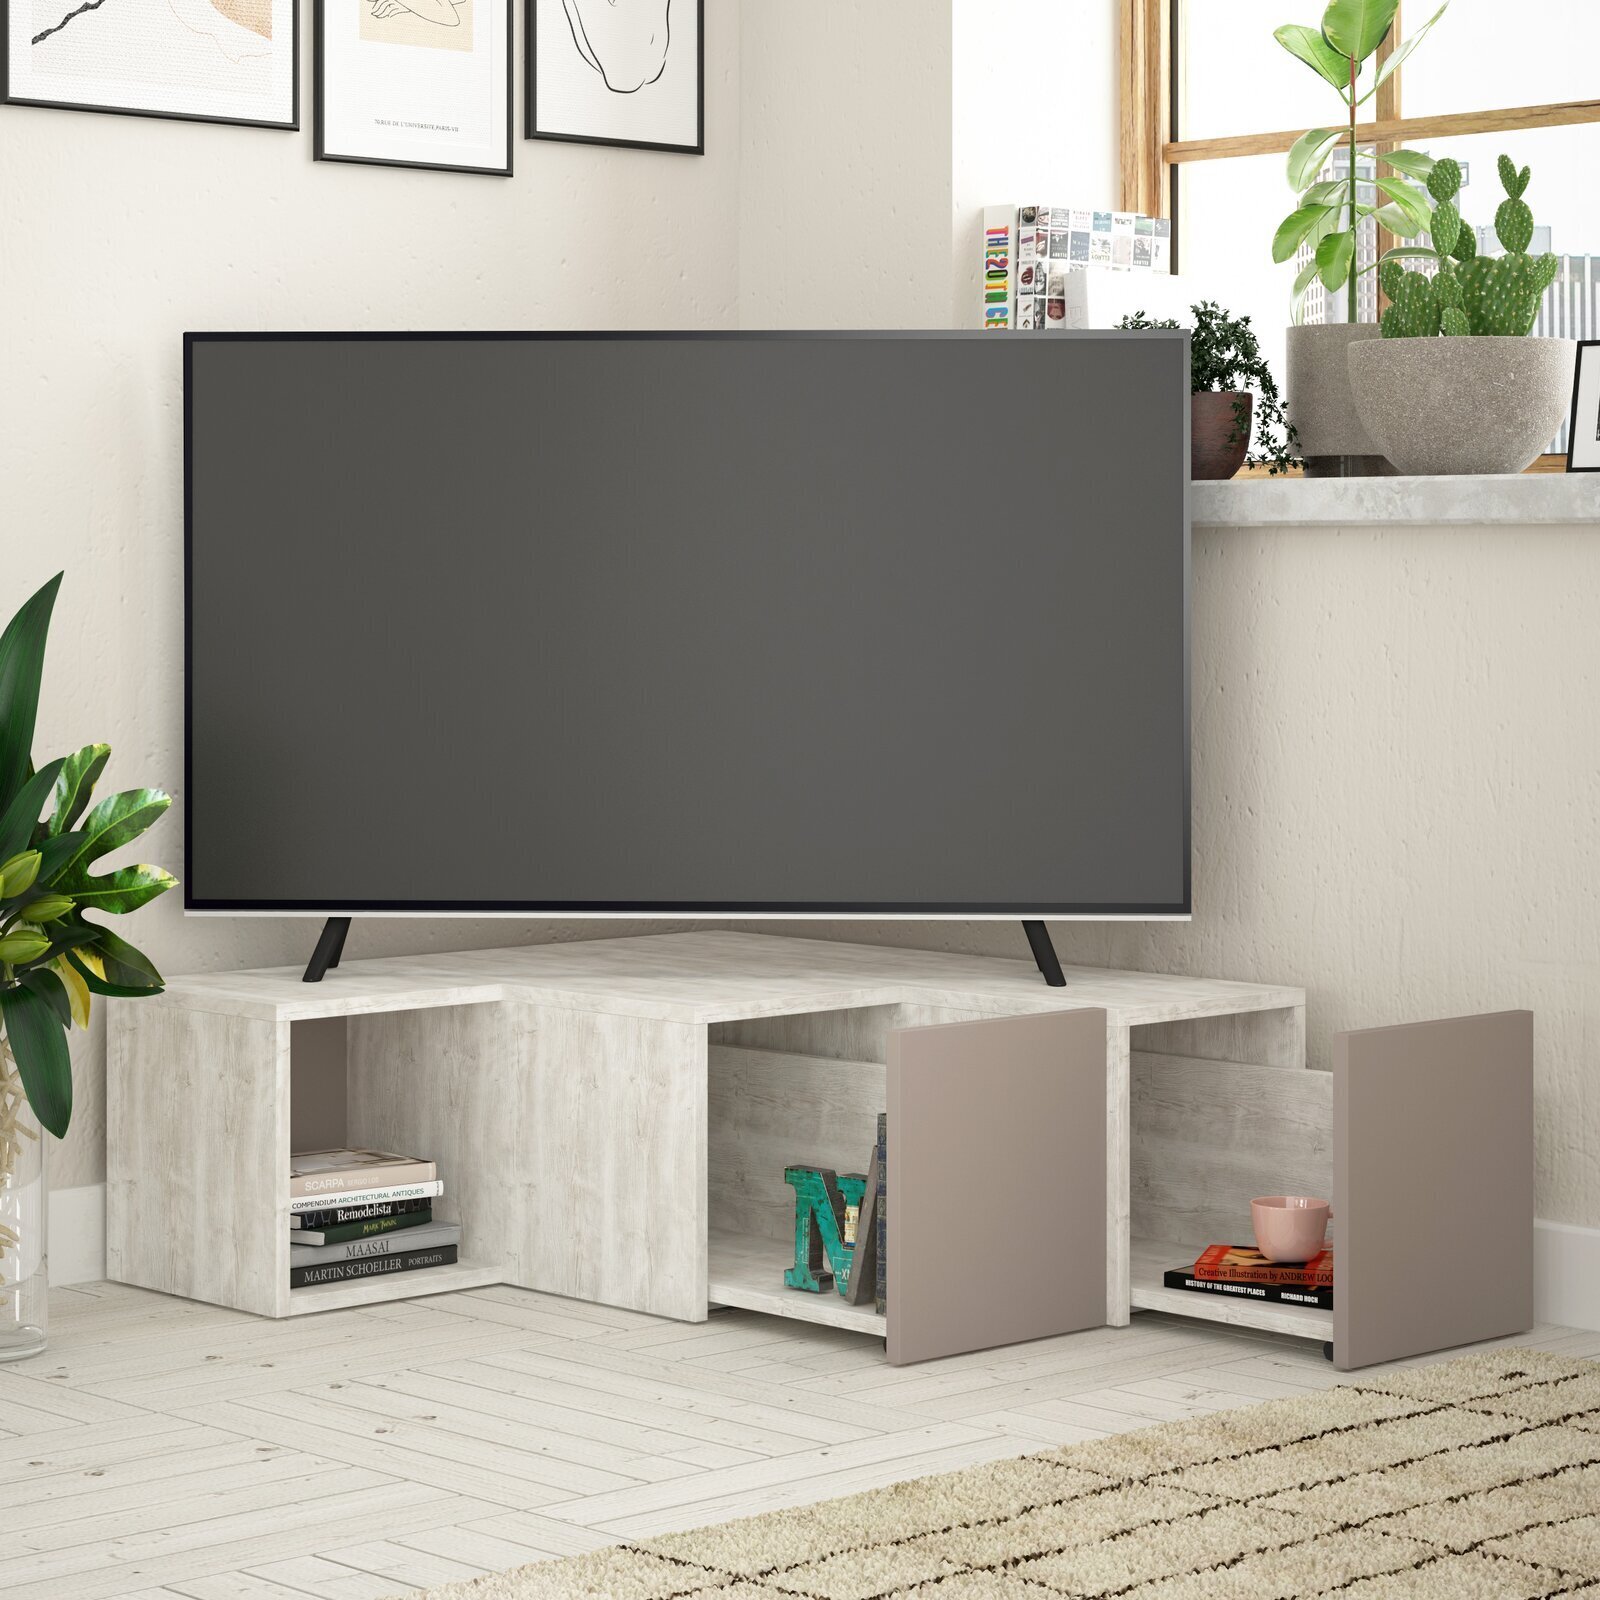 Simple, Contemporary Block TV Stand